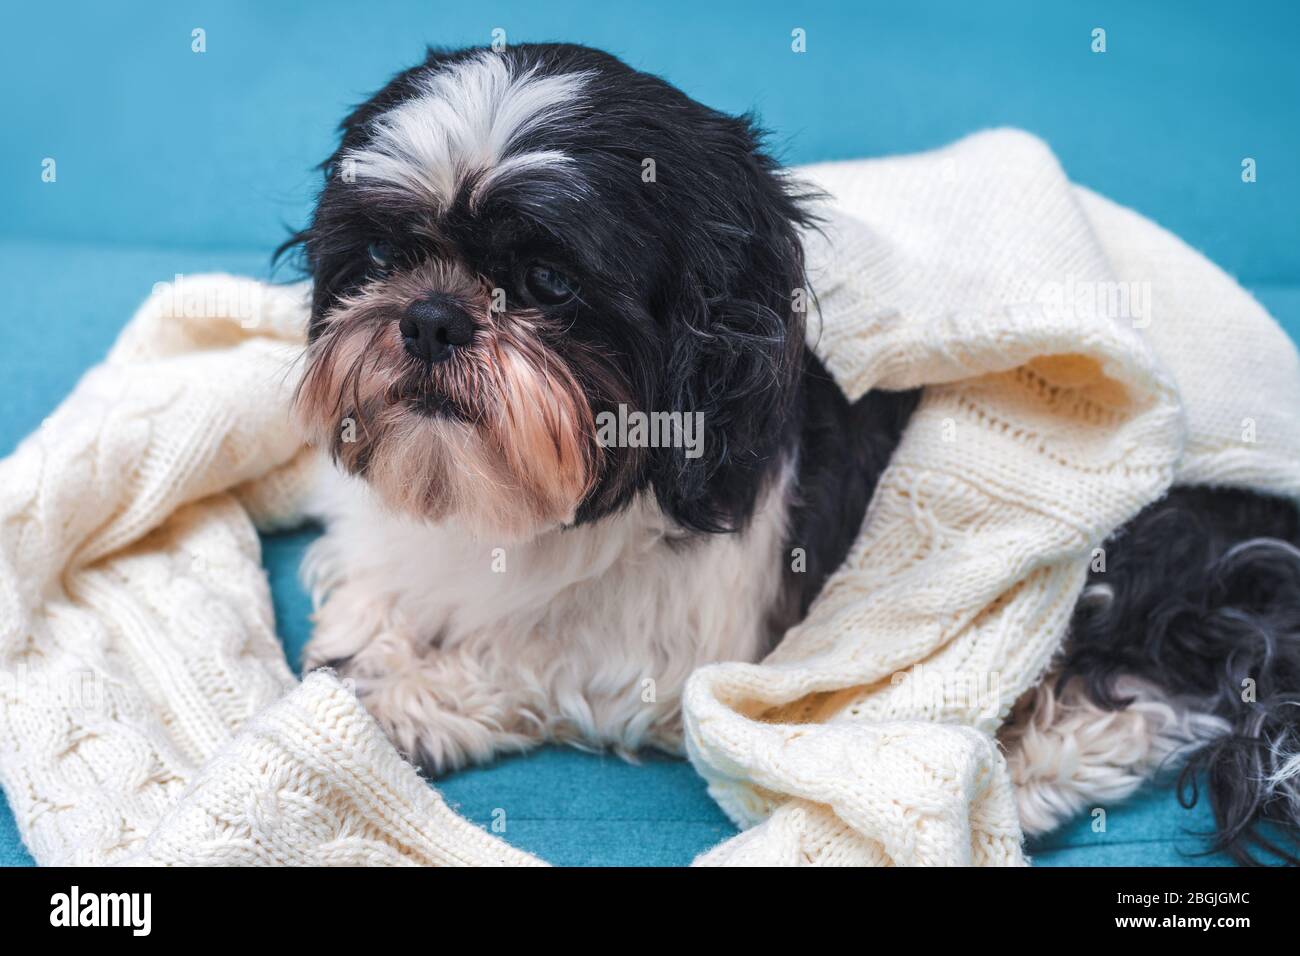 Funny cute dog is sitting on a sofa covered with a knitted sweater. Shih Tzu breed, gray with white. pet. Homeliness.  Stock Photo